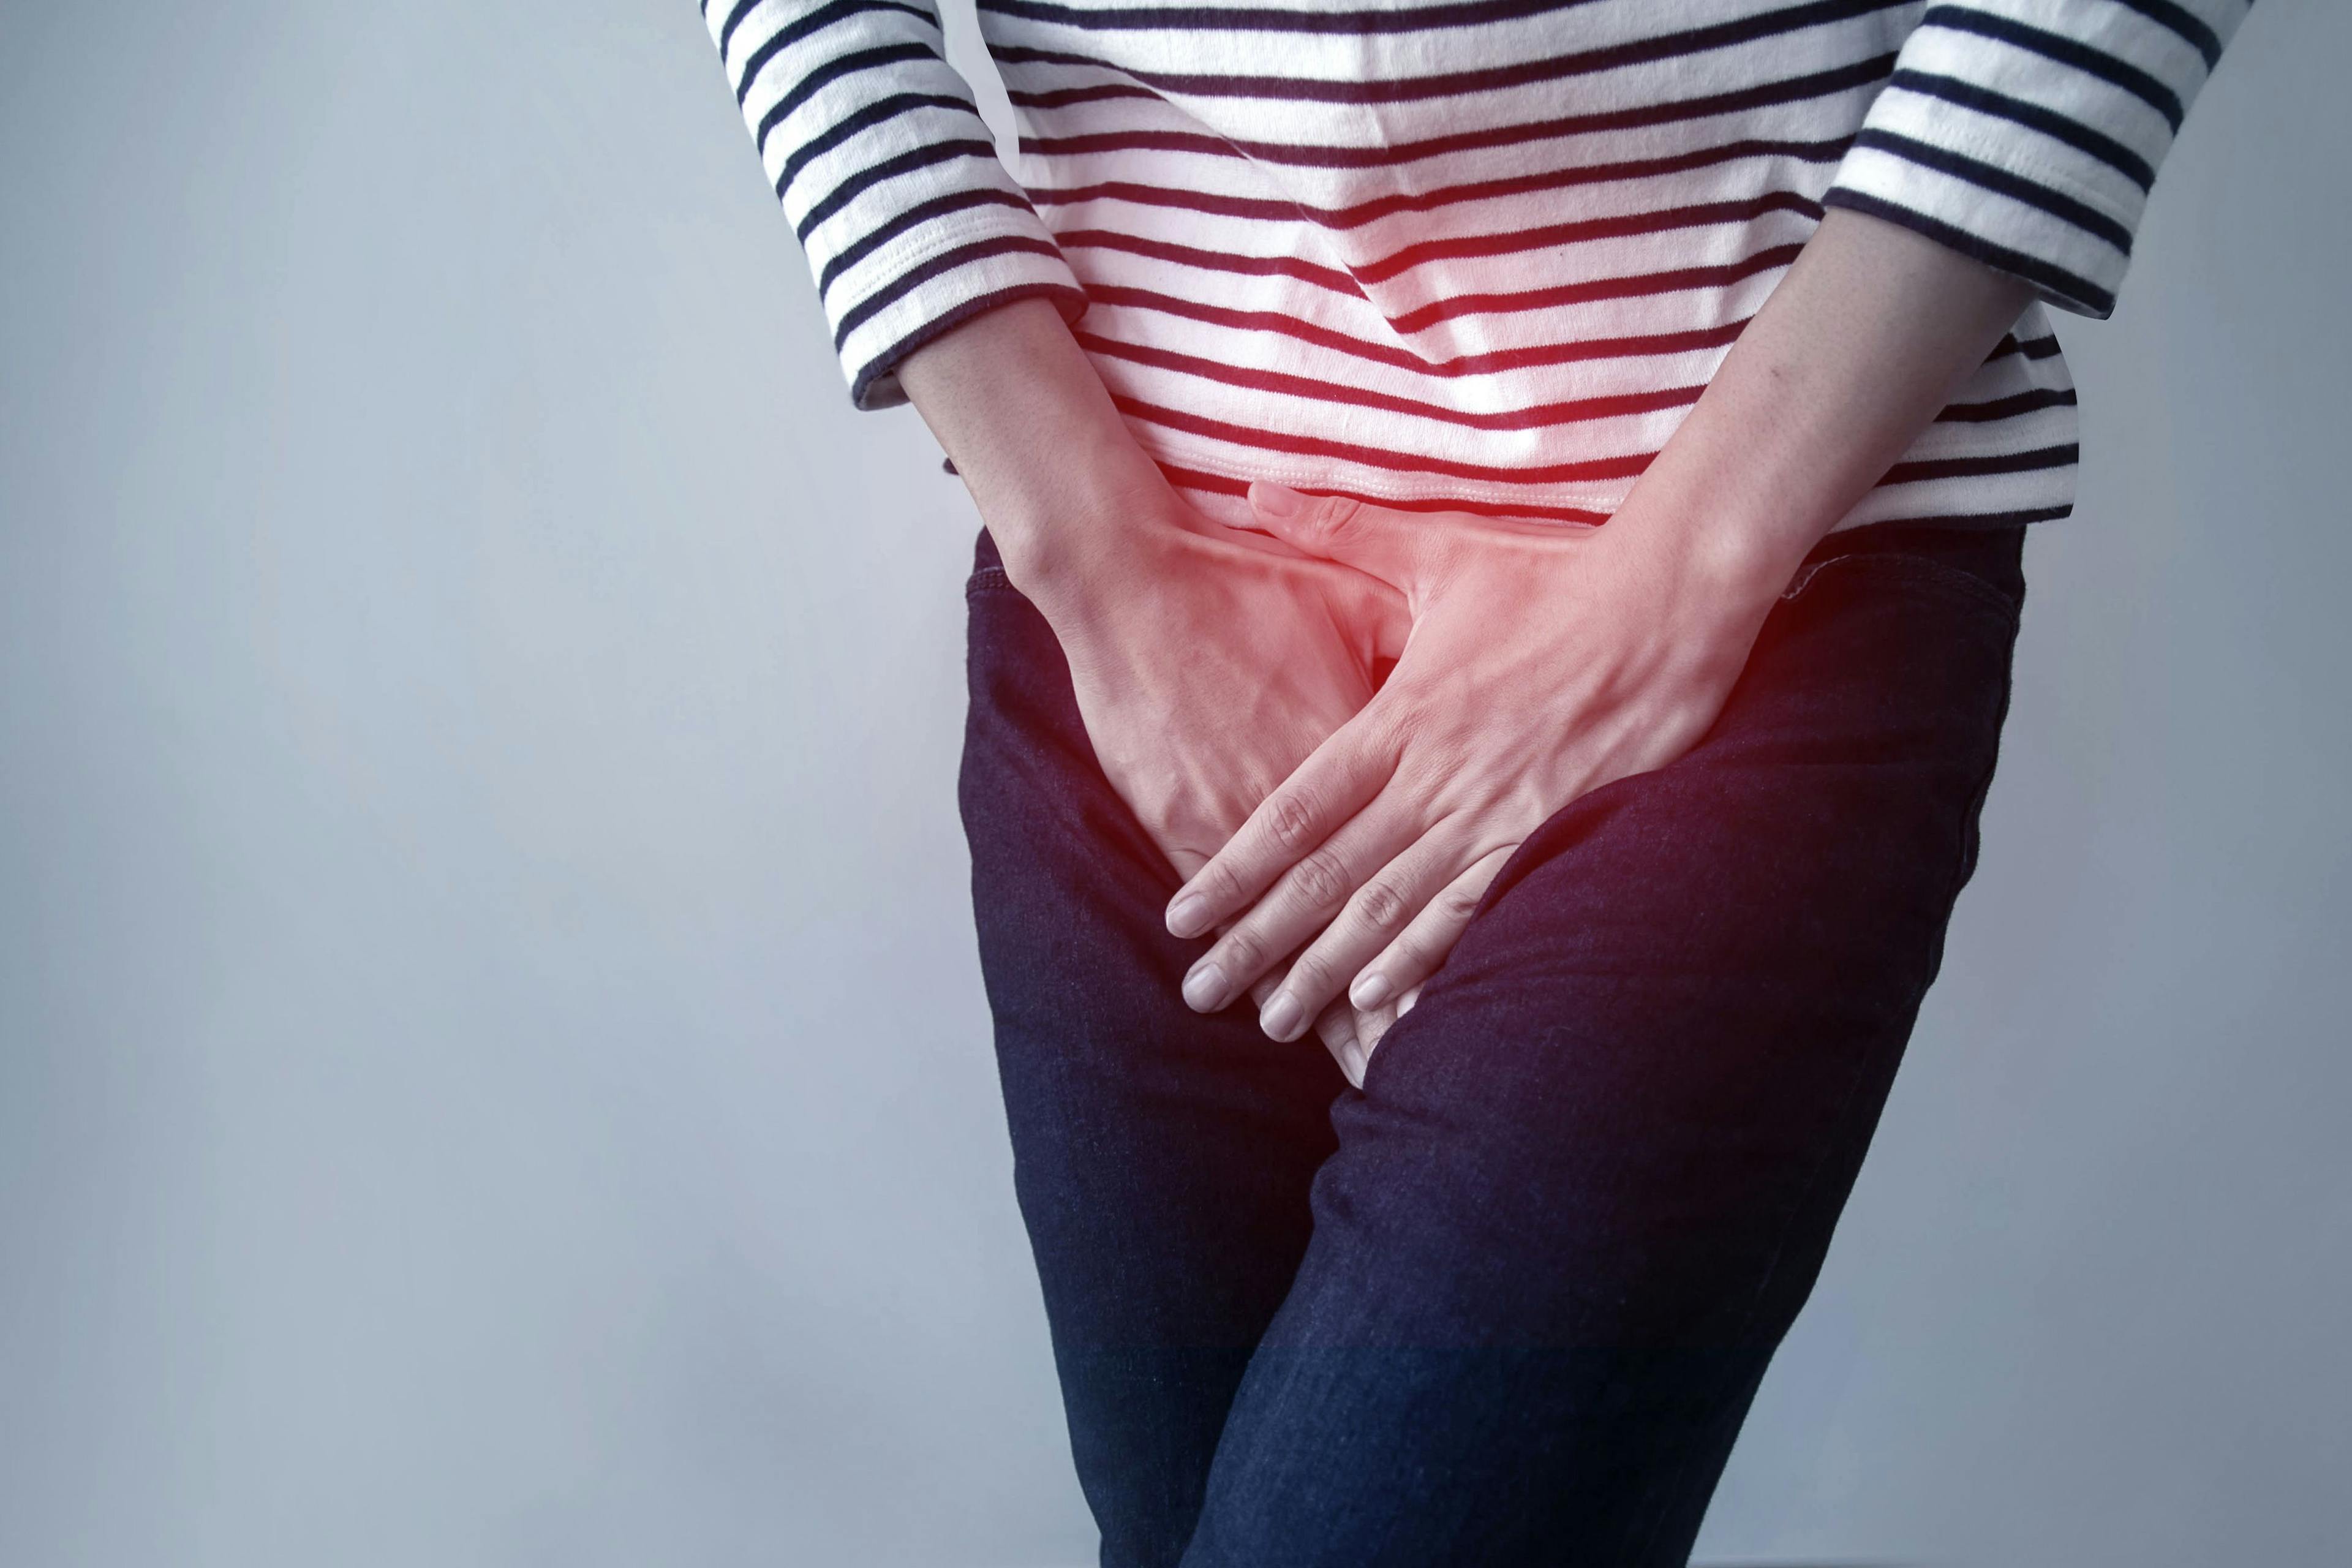 Endometriosis and lower urinary tract symptoms